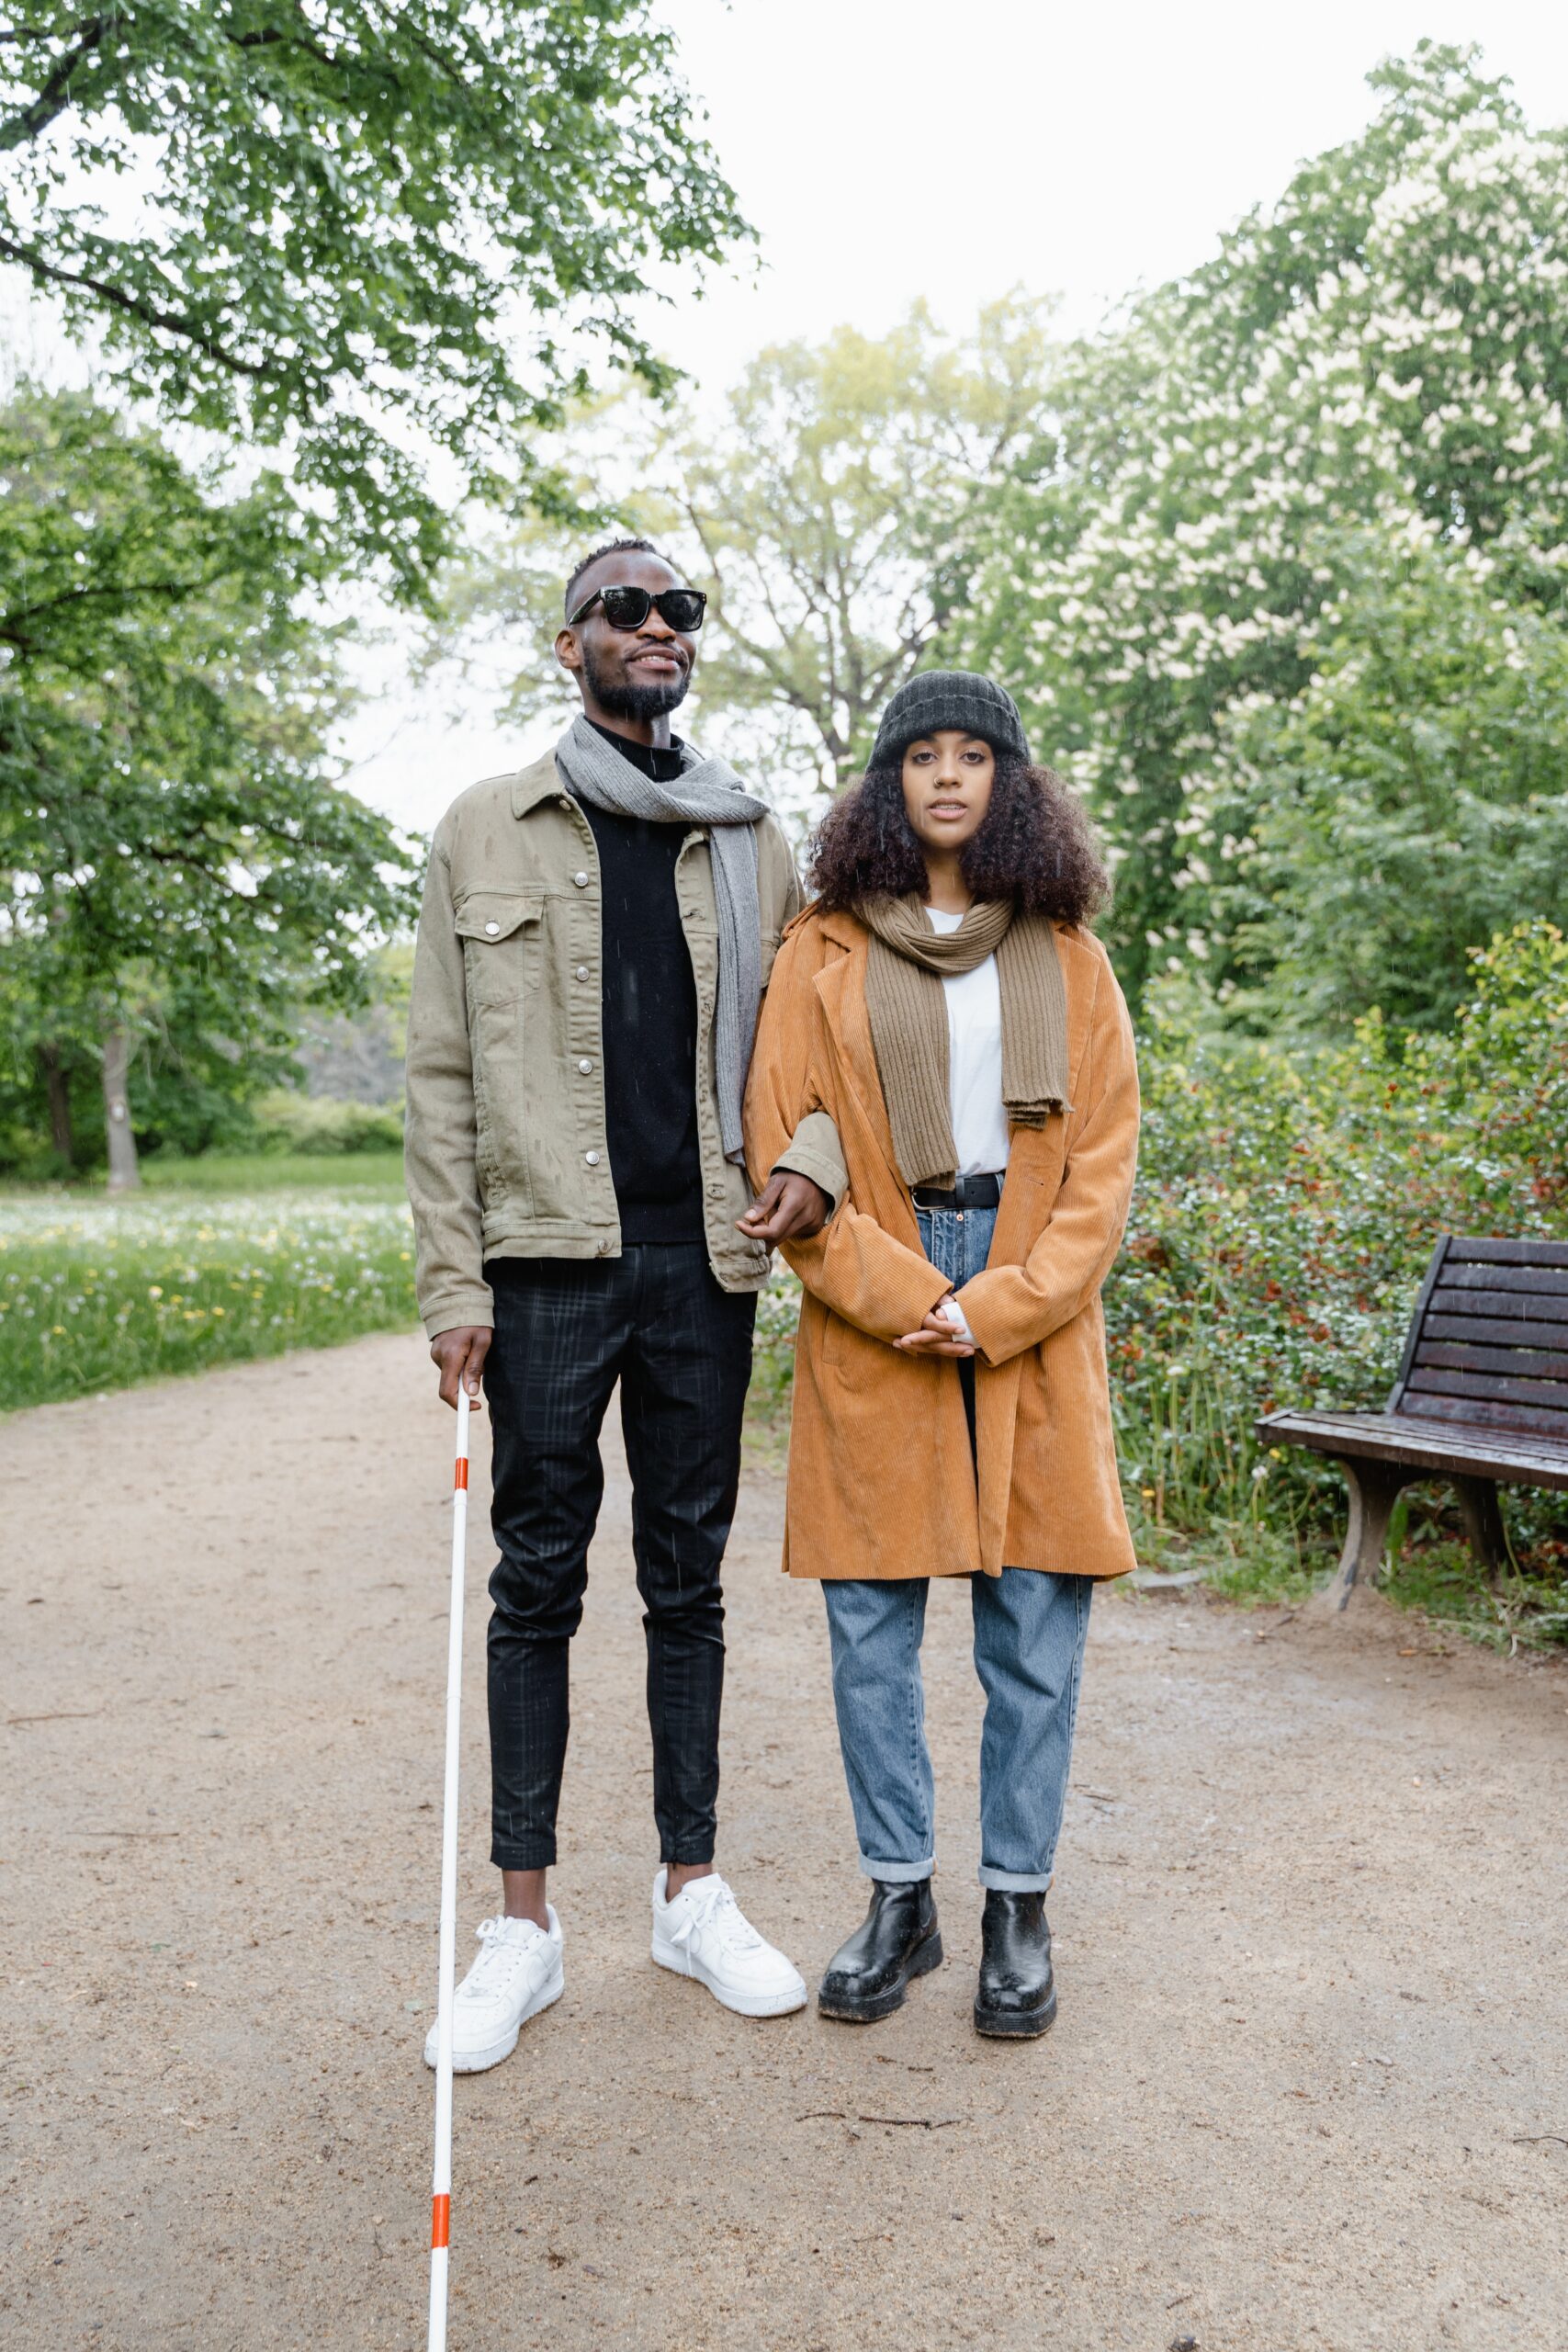 Image of two Black people standing in a park. The male on the left has a white cane.